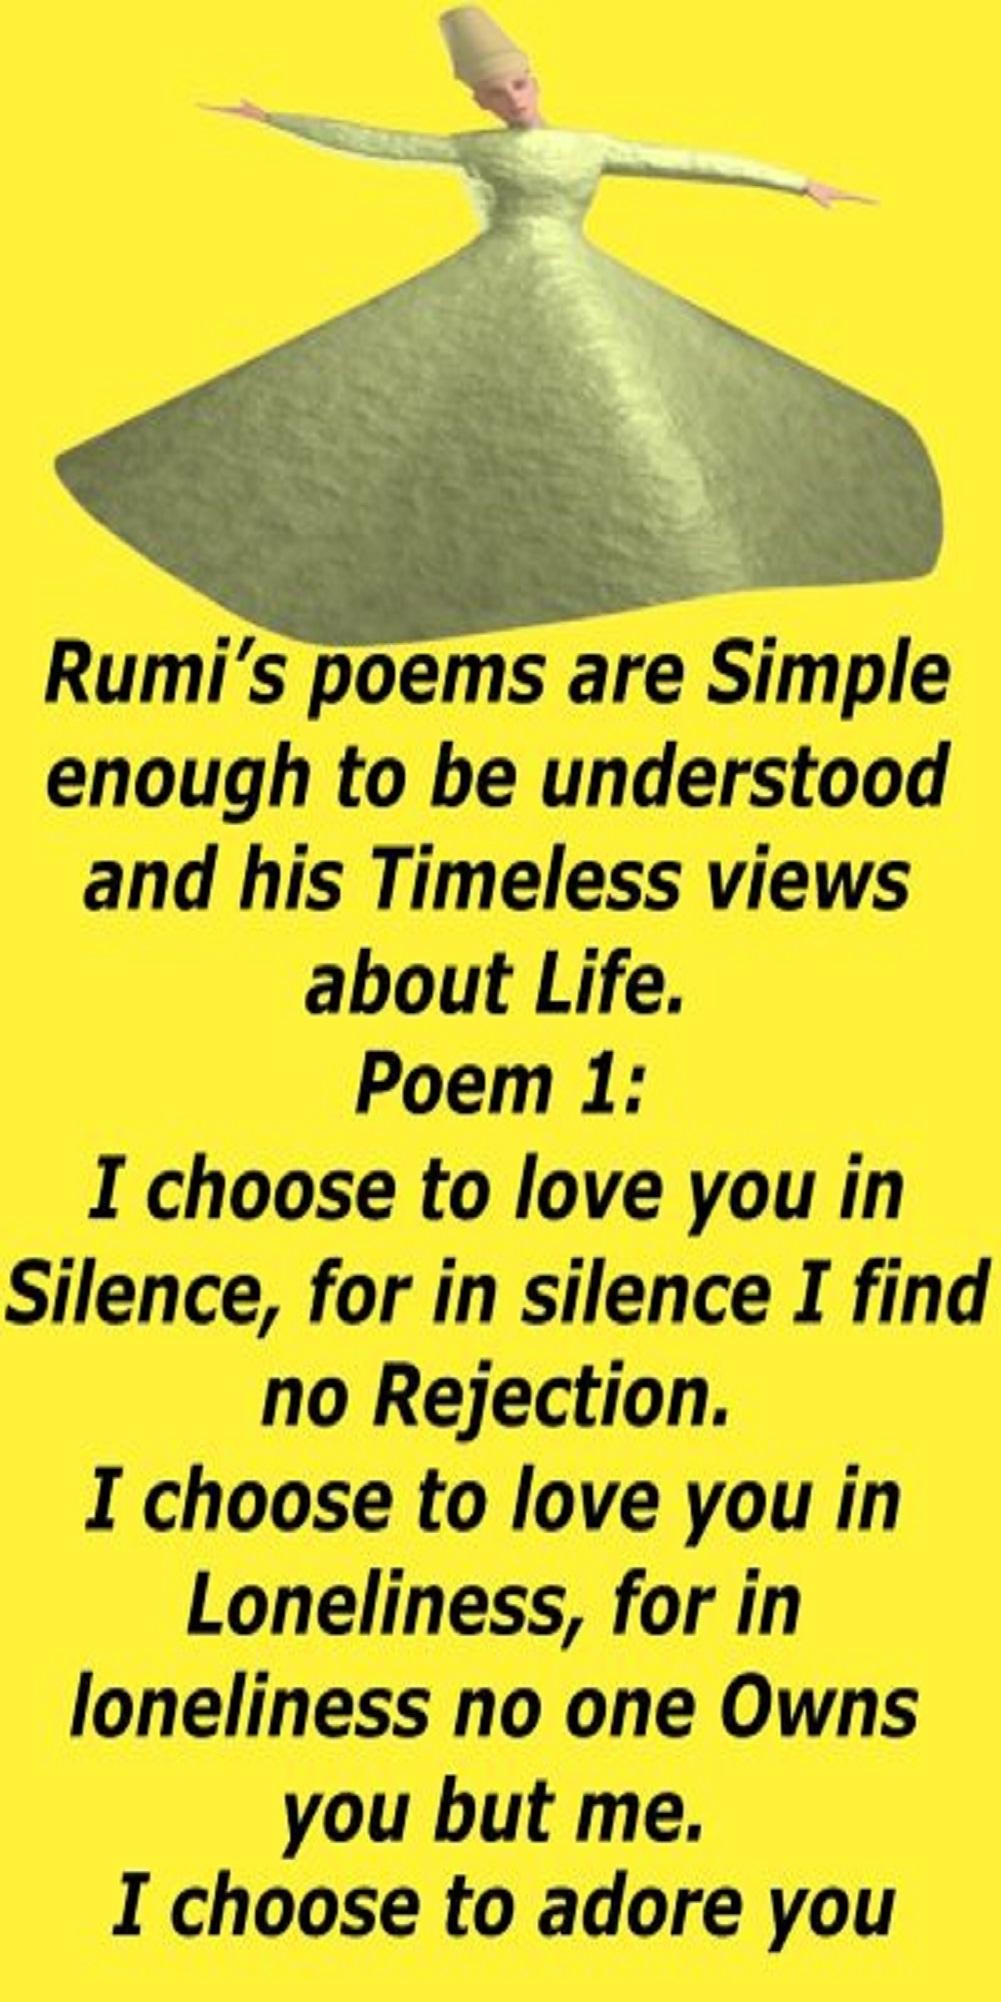 Poems on Life by Rumi s - Fable For Kids